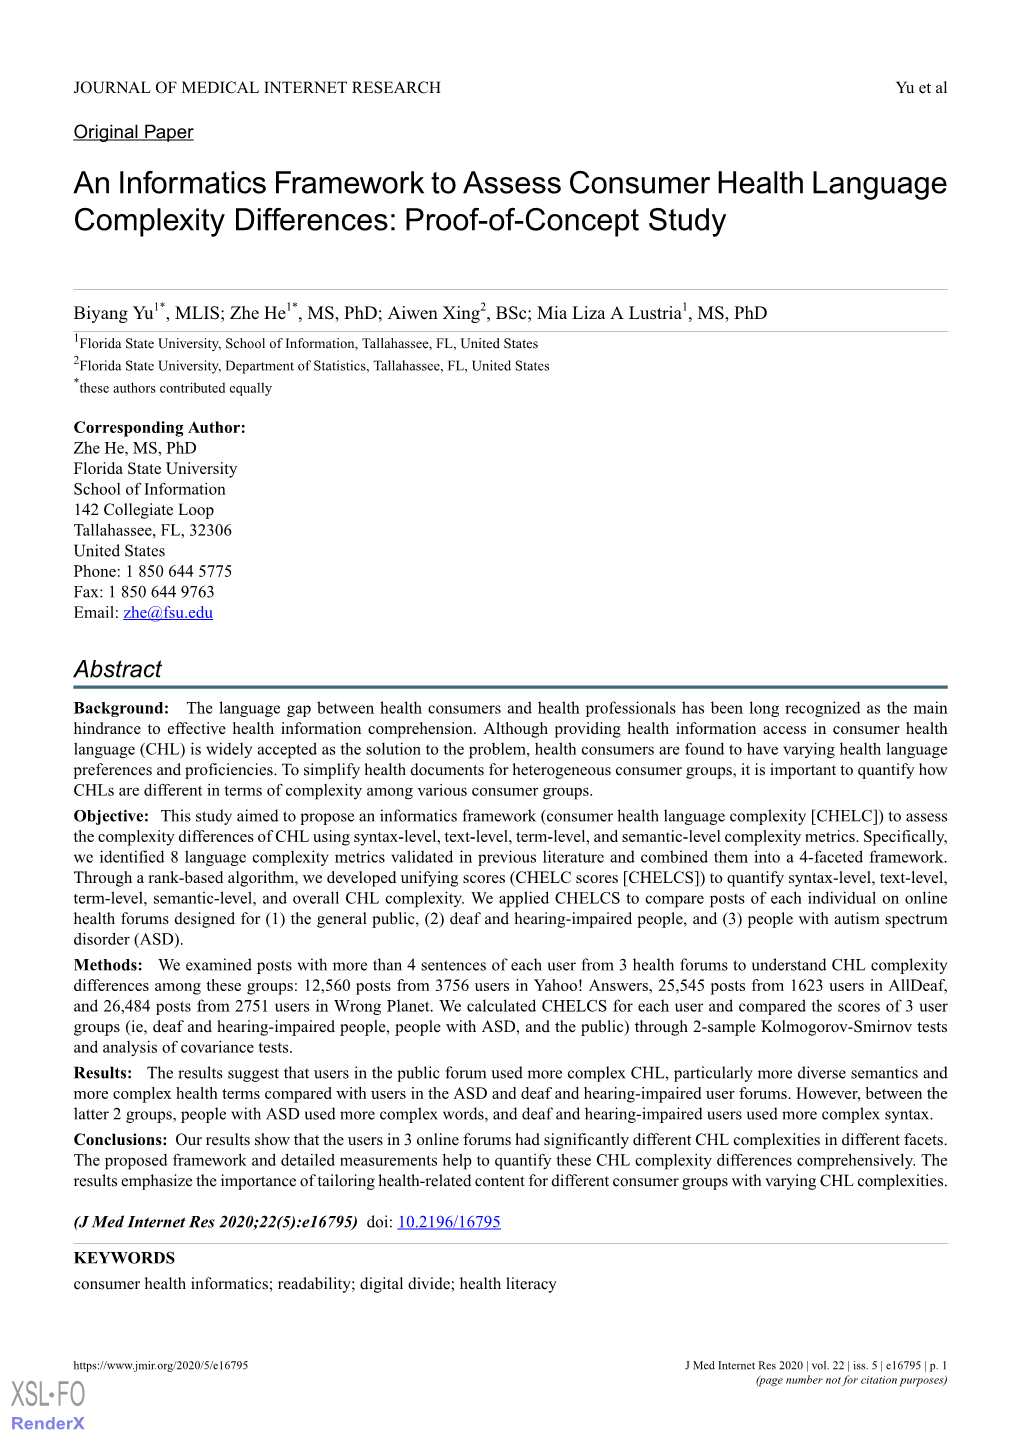 An Informatics Framework to Assess Consumer Health Language Complexity Differences: Proof-Of-Concept Study